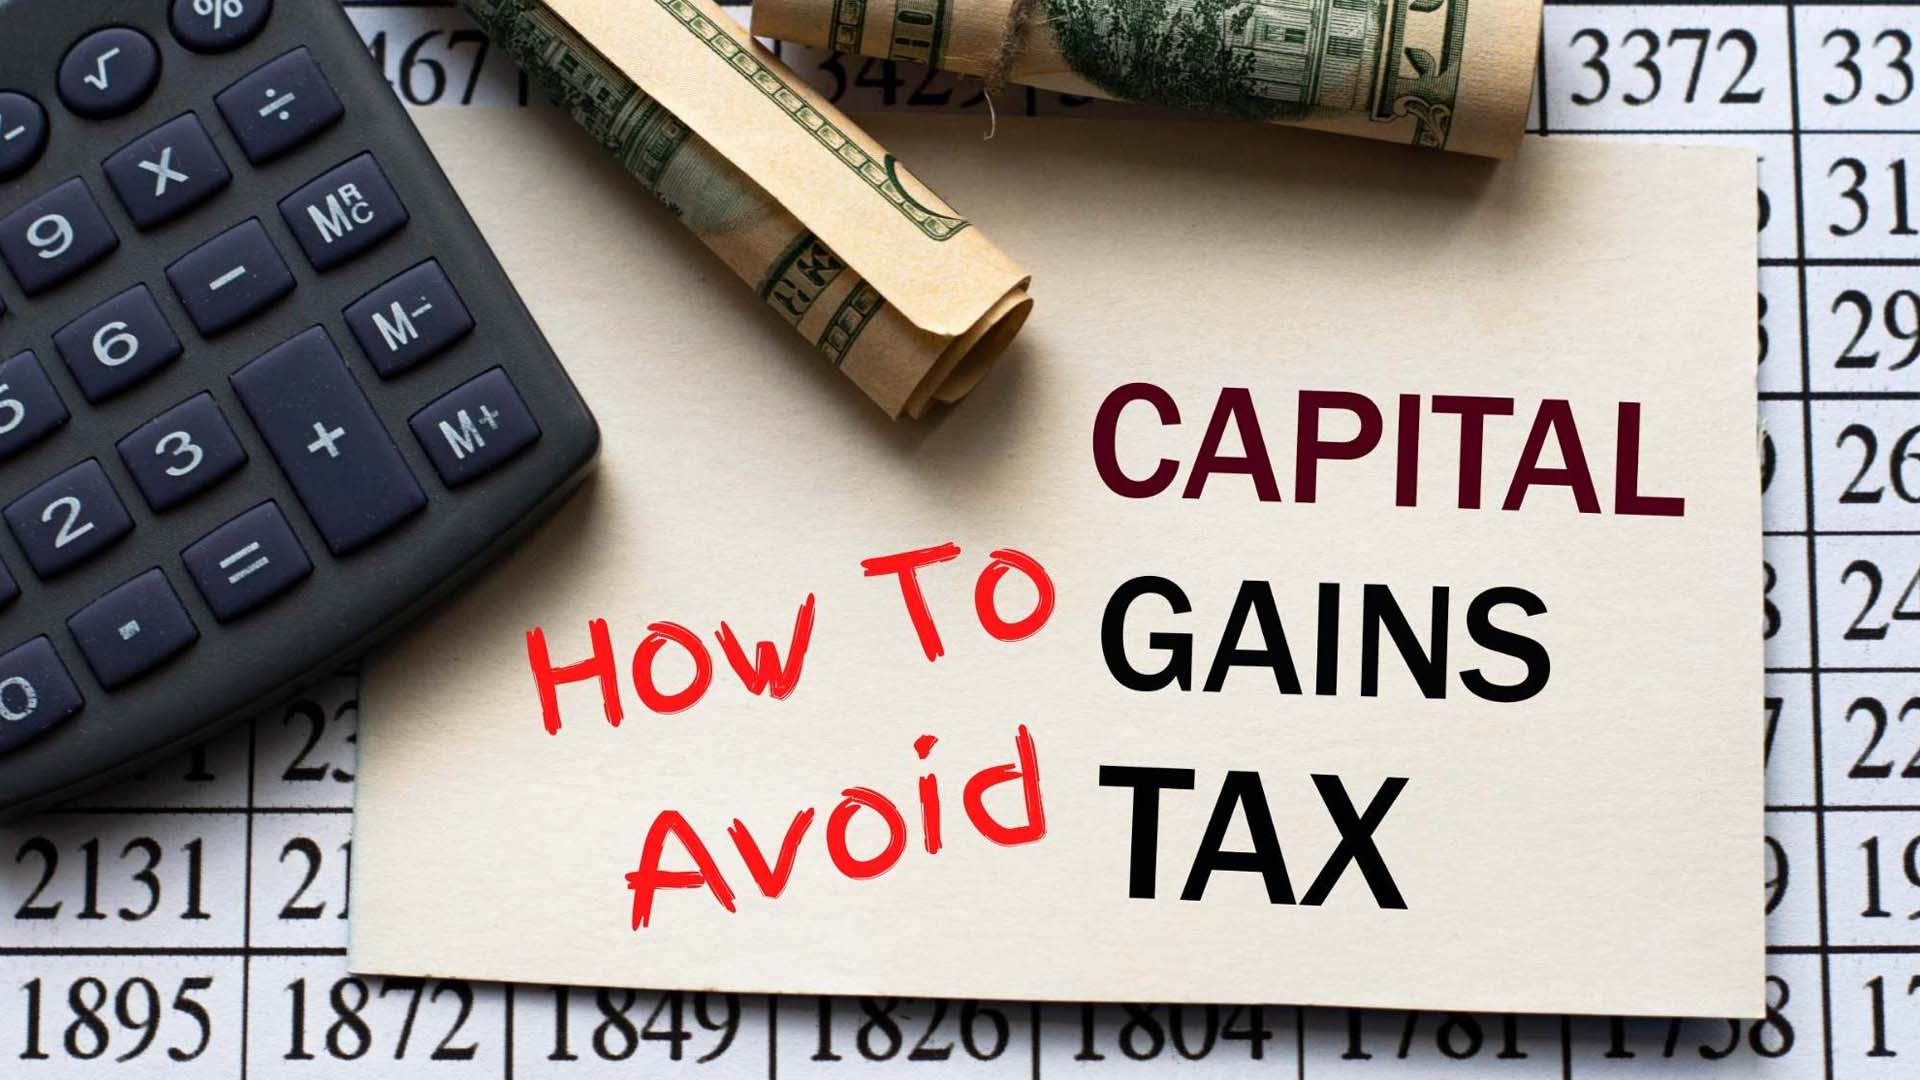 How To Avoid Capital Gains Tax